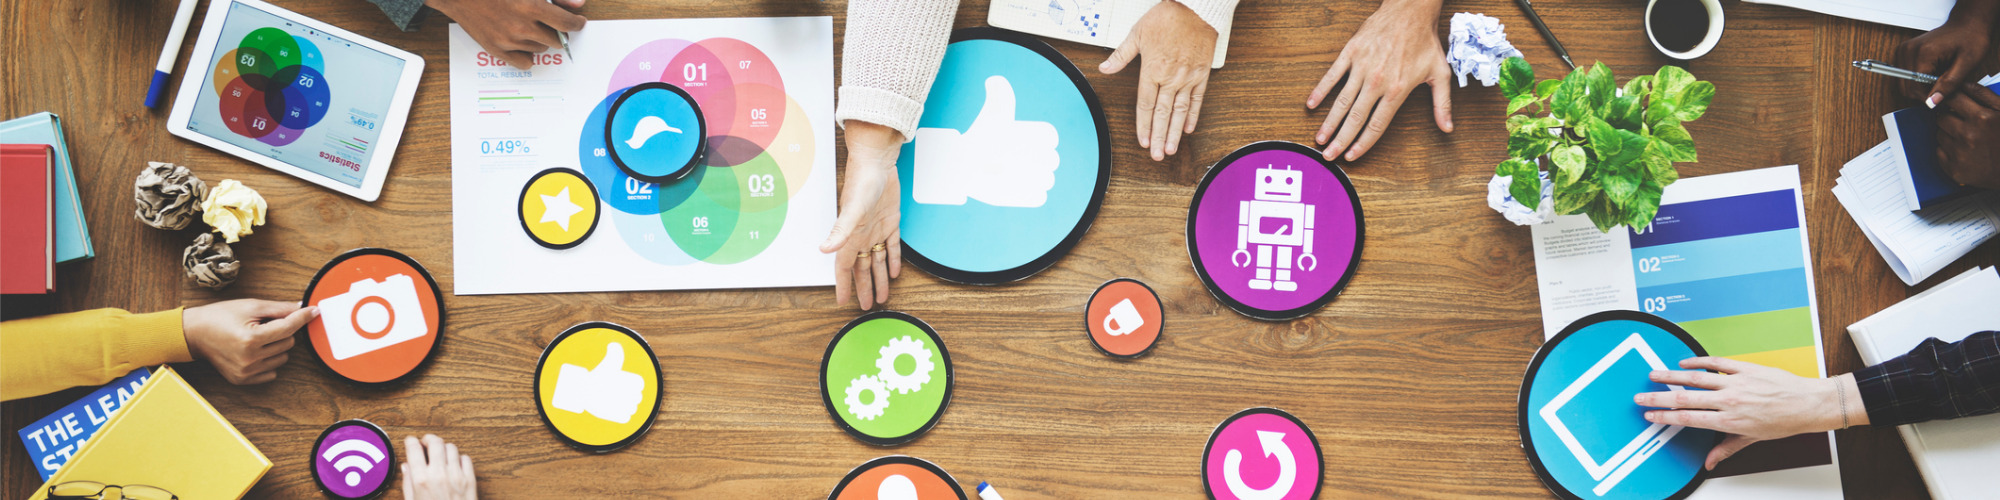 Campaign Planning for Social Media Success - From Start to Finish